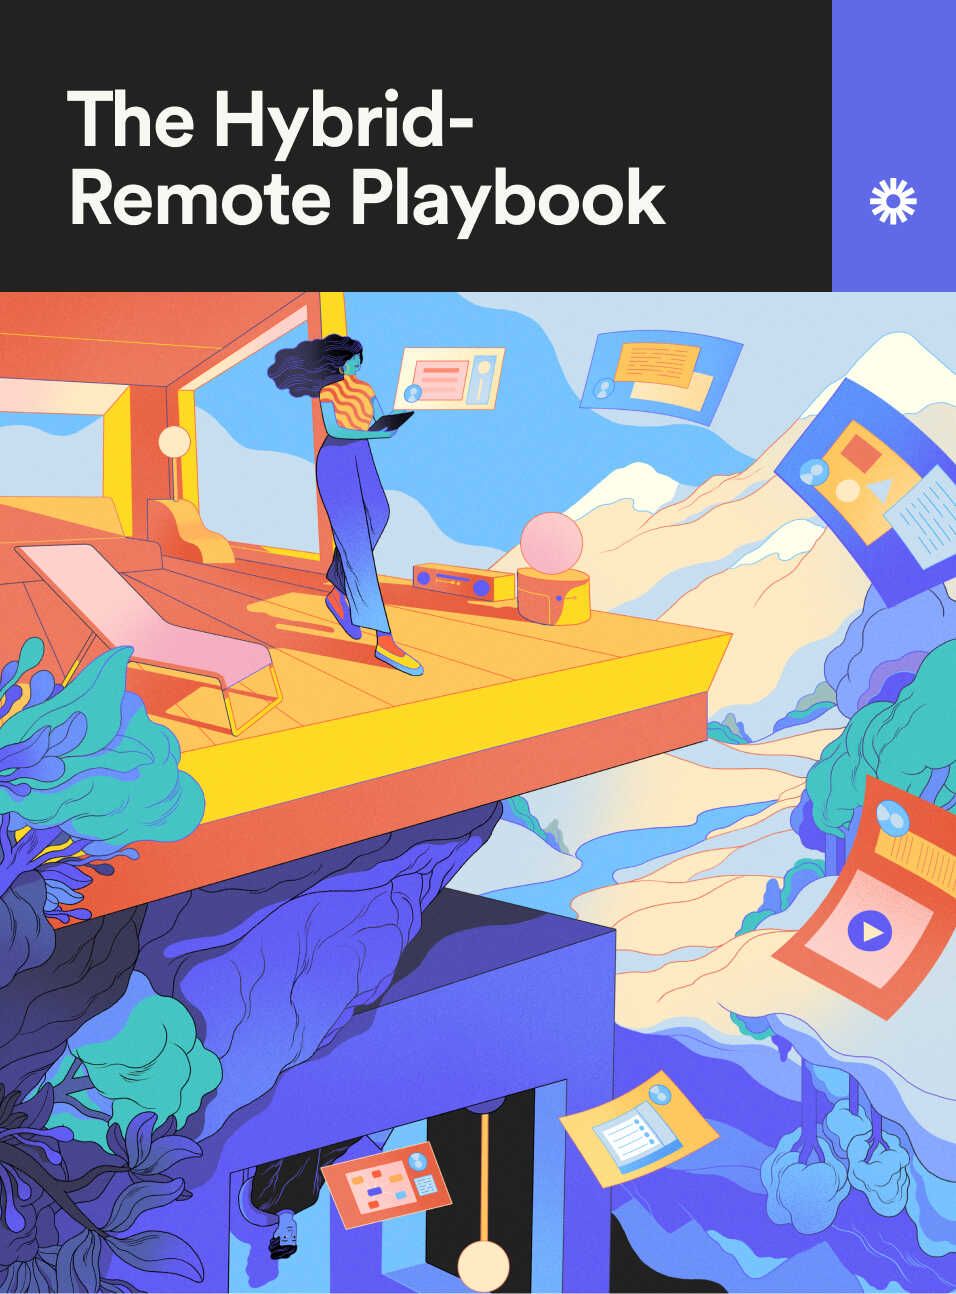 The Hybrid-Remote Playbook eBook Cover, with illustration of person holding a laptop in a modern building, with windows flying around them.